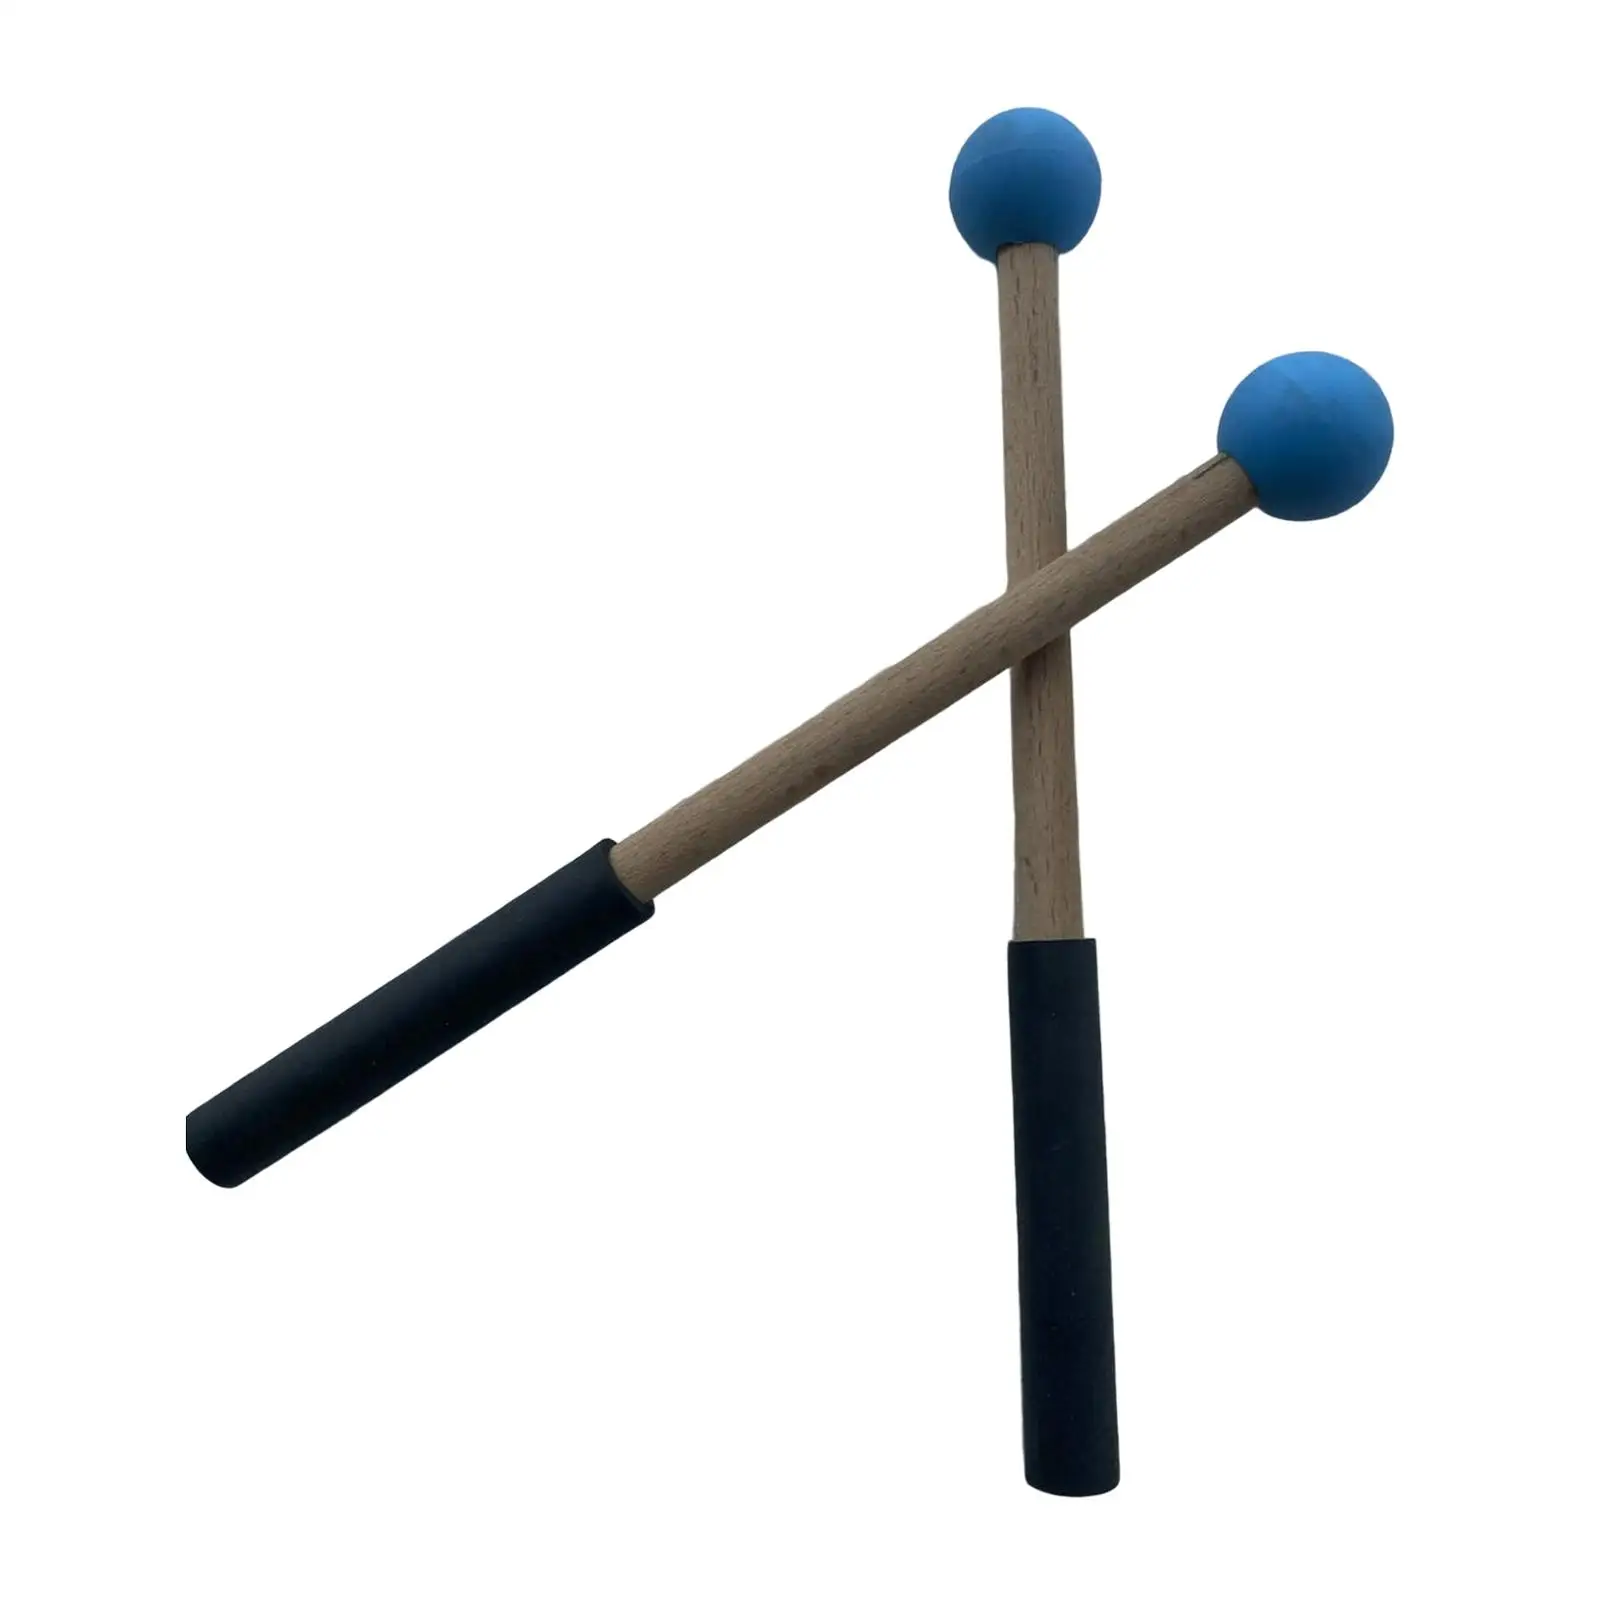 2 Pieces Wooden Silicone Drumsticks Hand Percussion Mallets for Xylophone